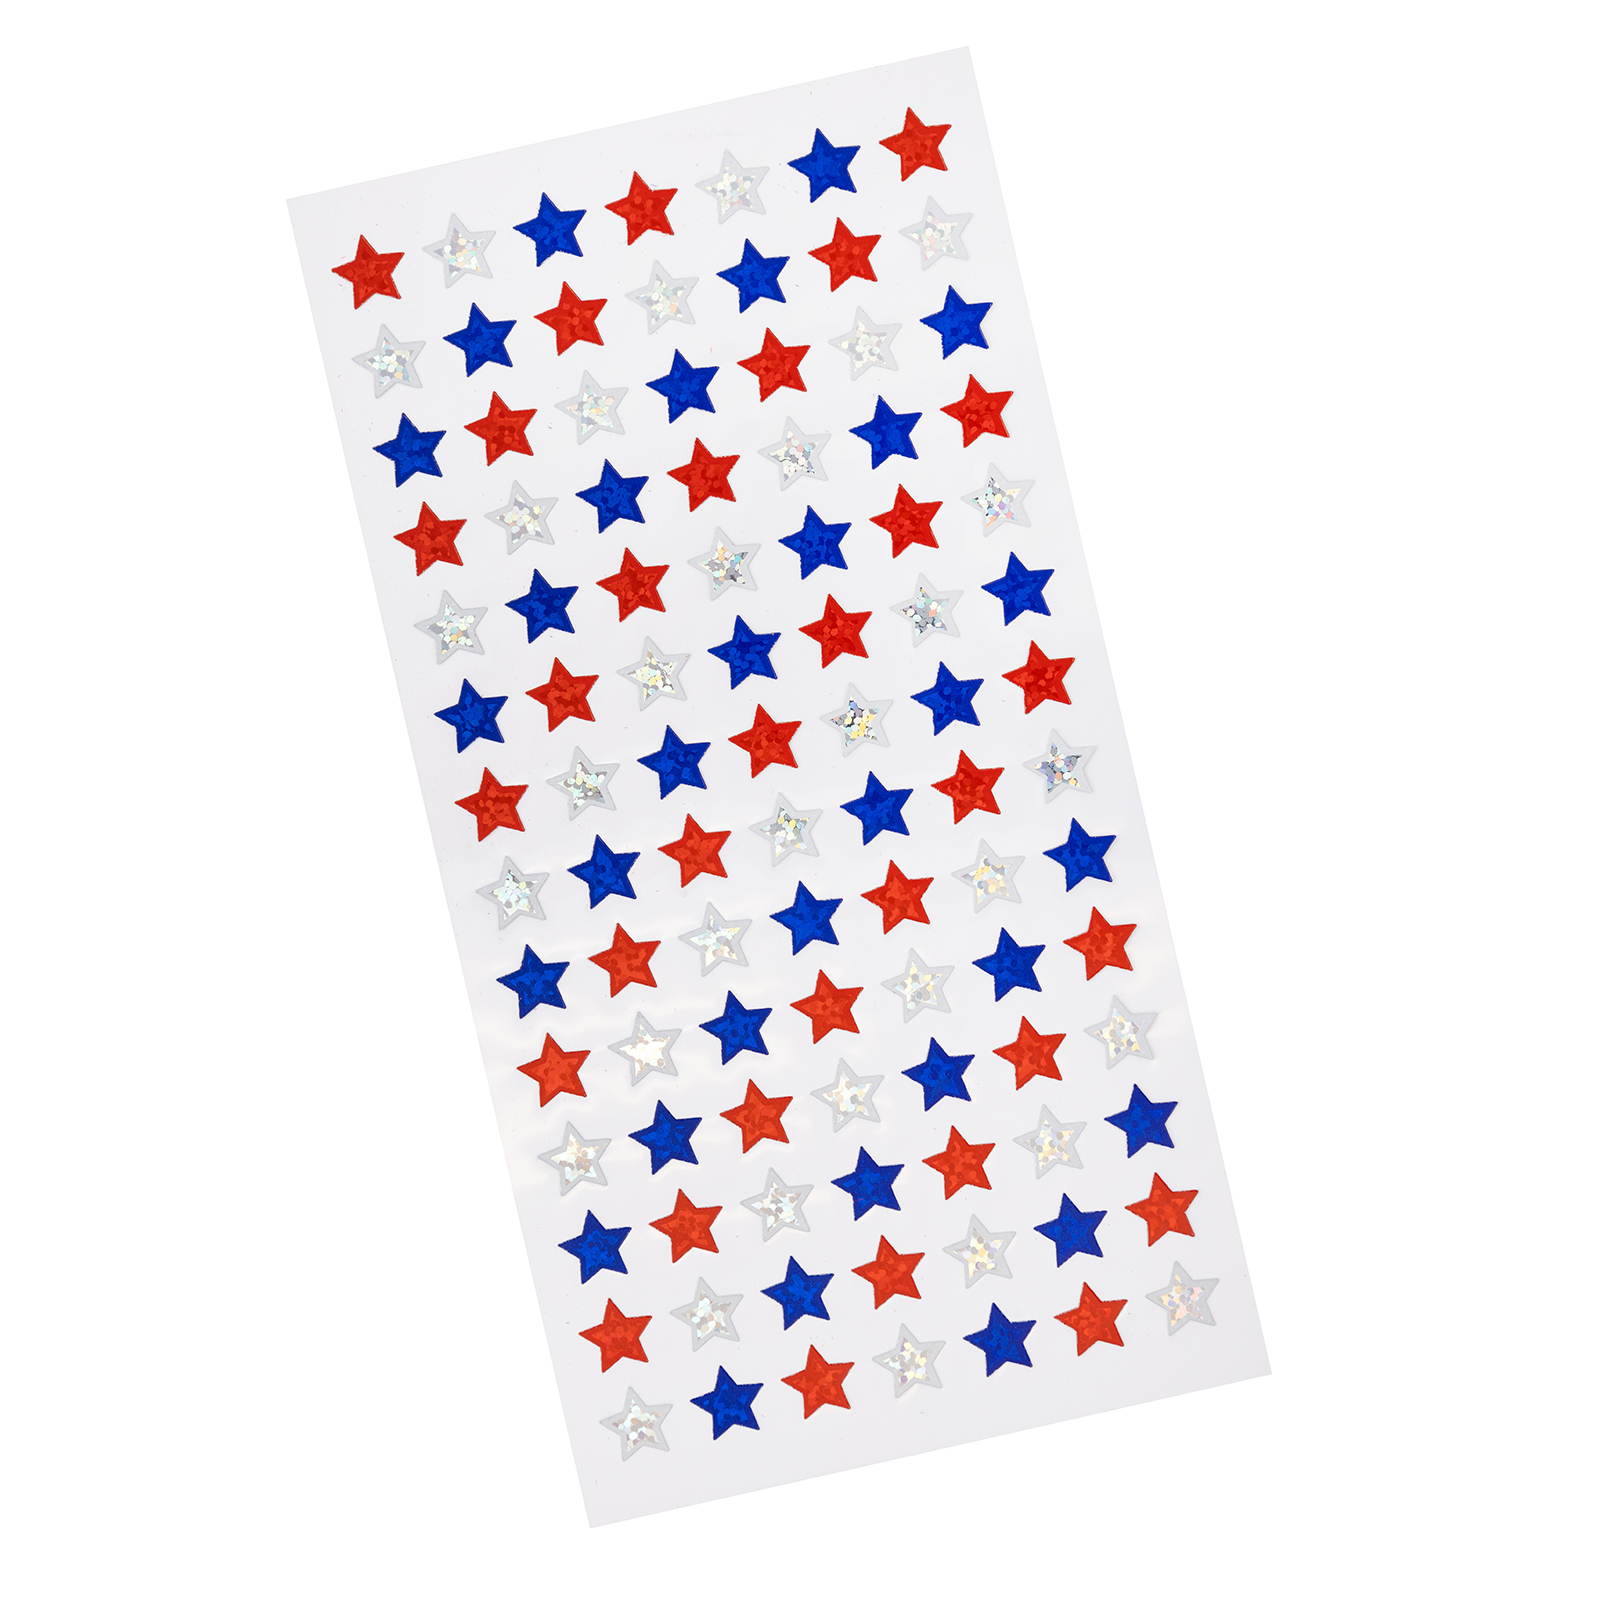 Sticko Solid Classic 4th Of July Multicolor Star Repeats Plastic Stickers, 98 Piece - image 3 of 4